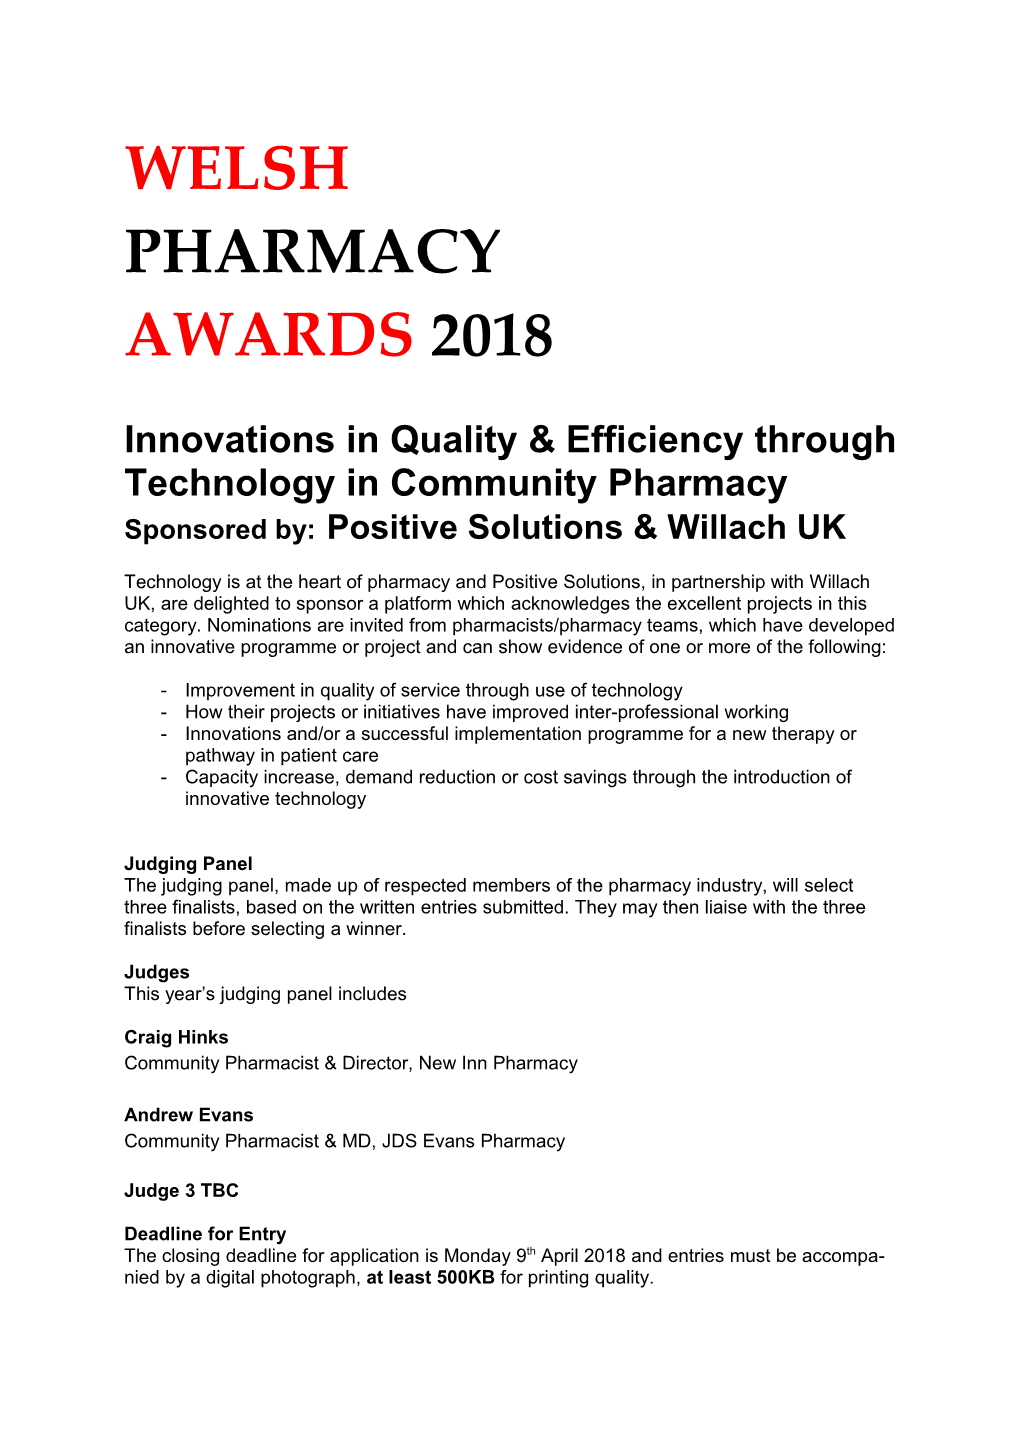 Innovations in Quality & Efficiency Through Technology in Community Pharmacy